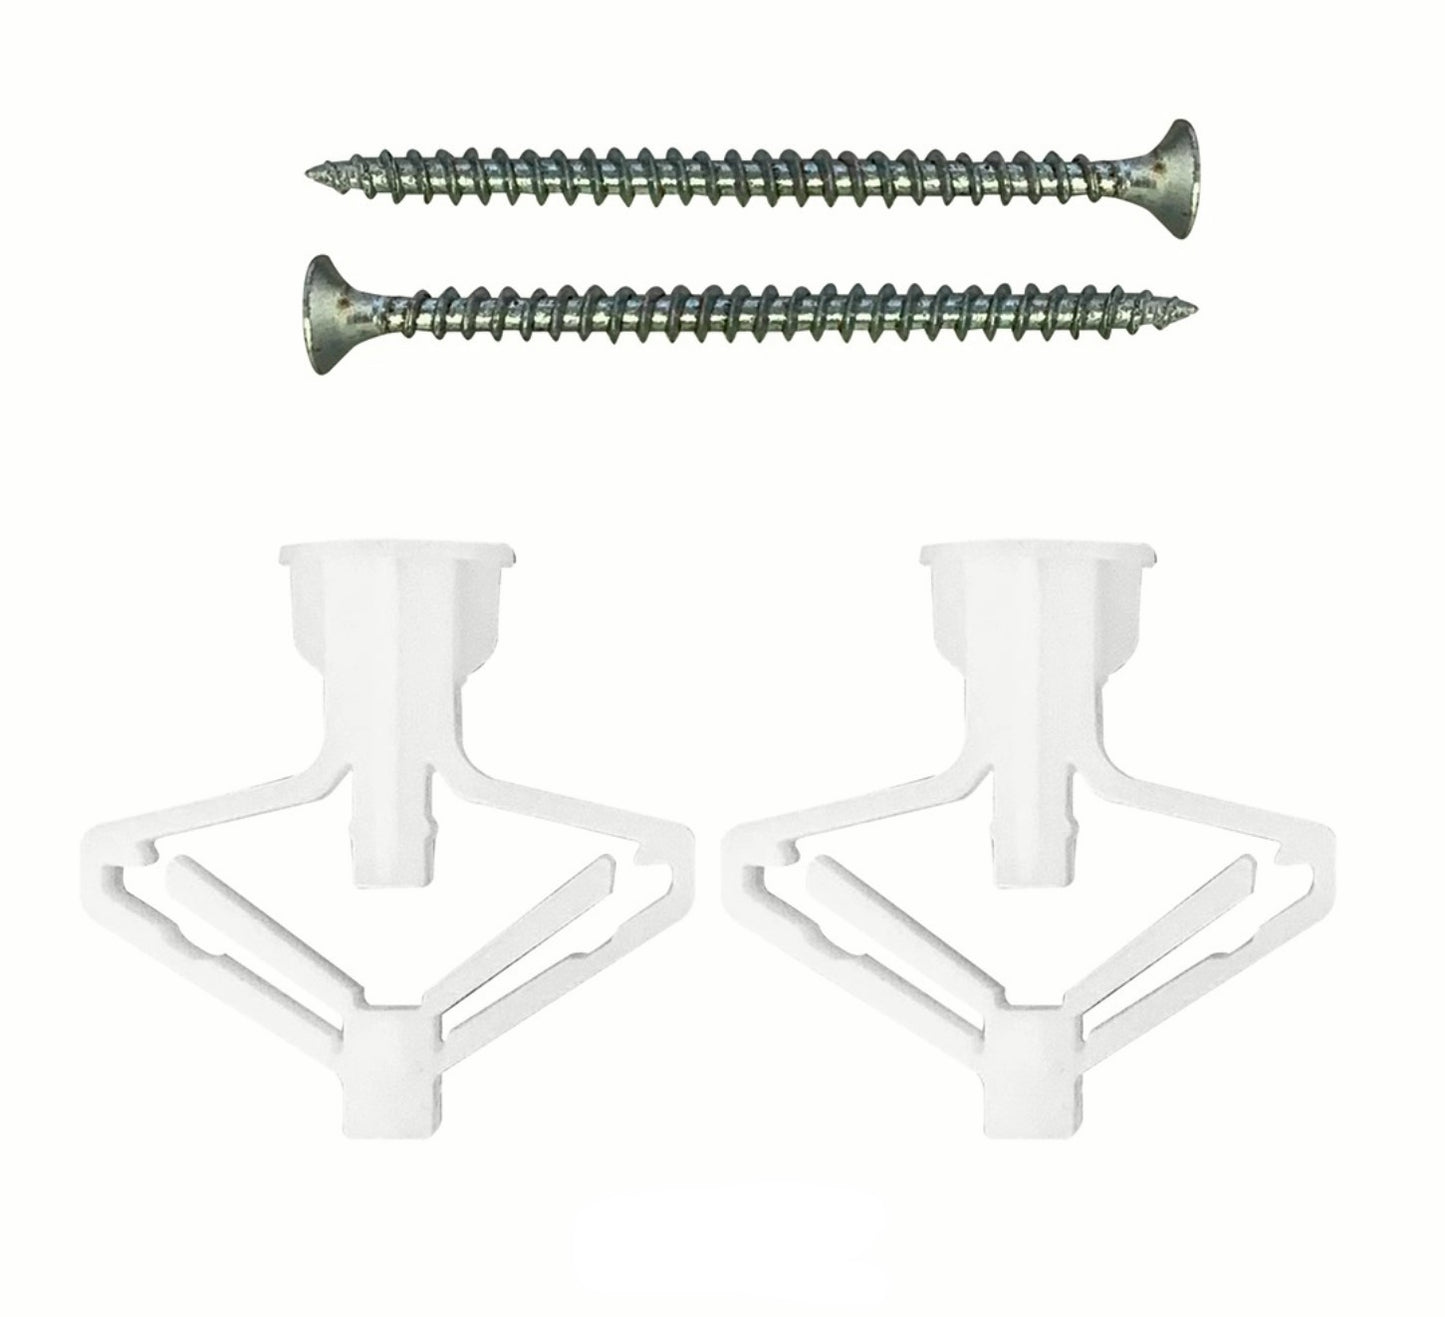 Drywall Anchor Set Wall Anchors Plasterboard Plugs Screws Butterfly Expansion Tube